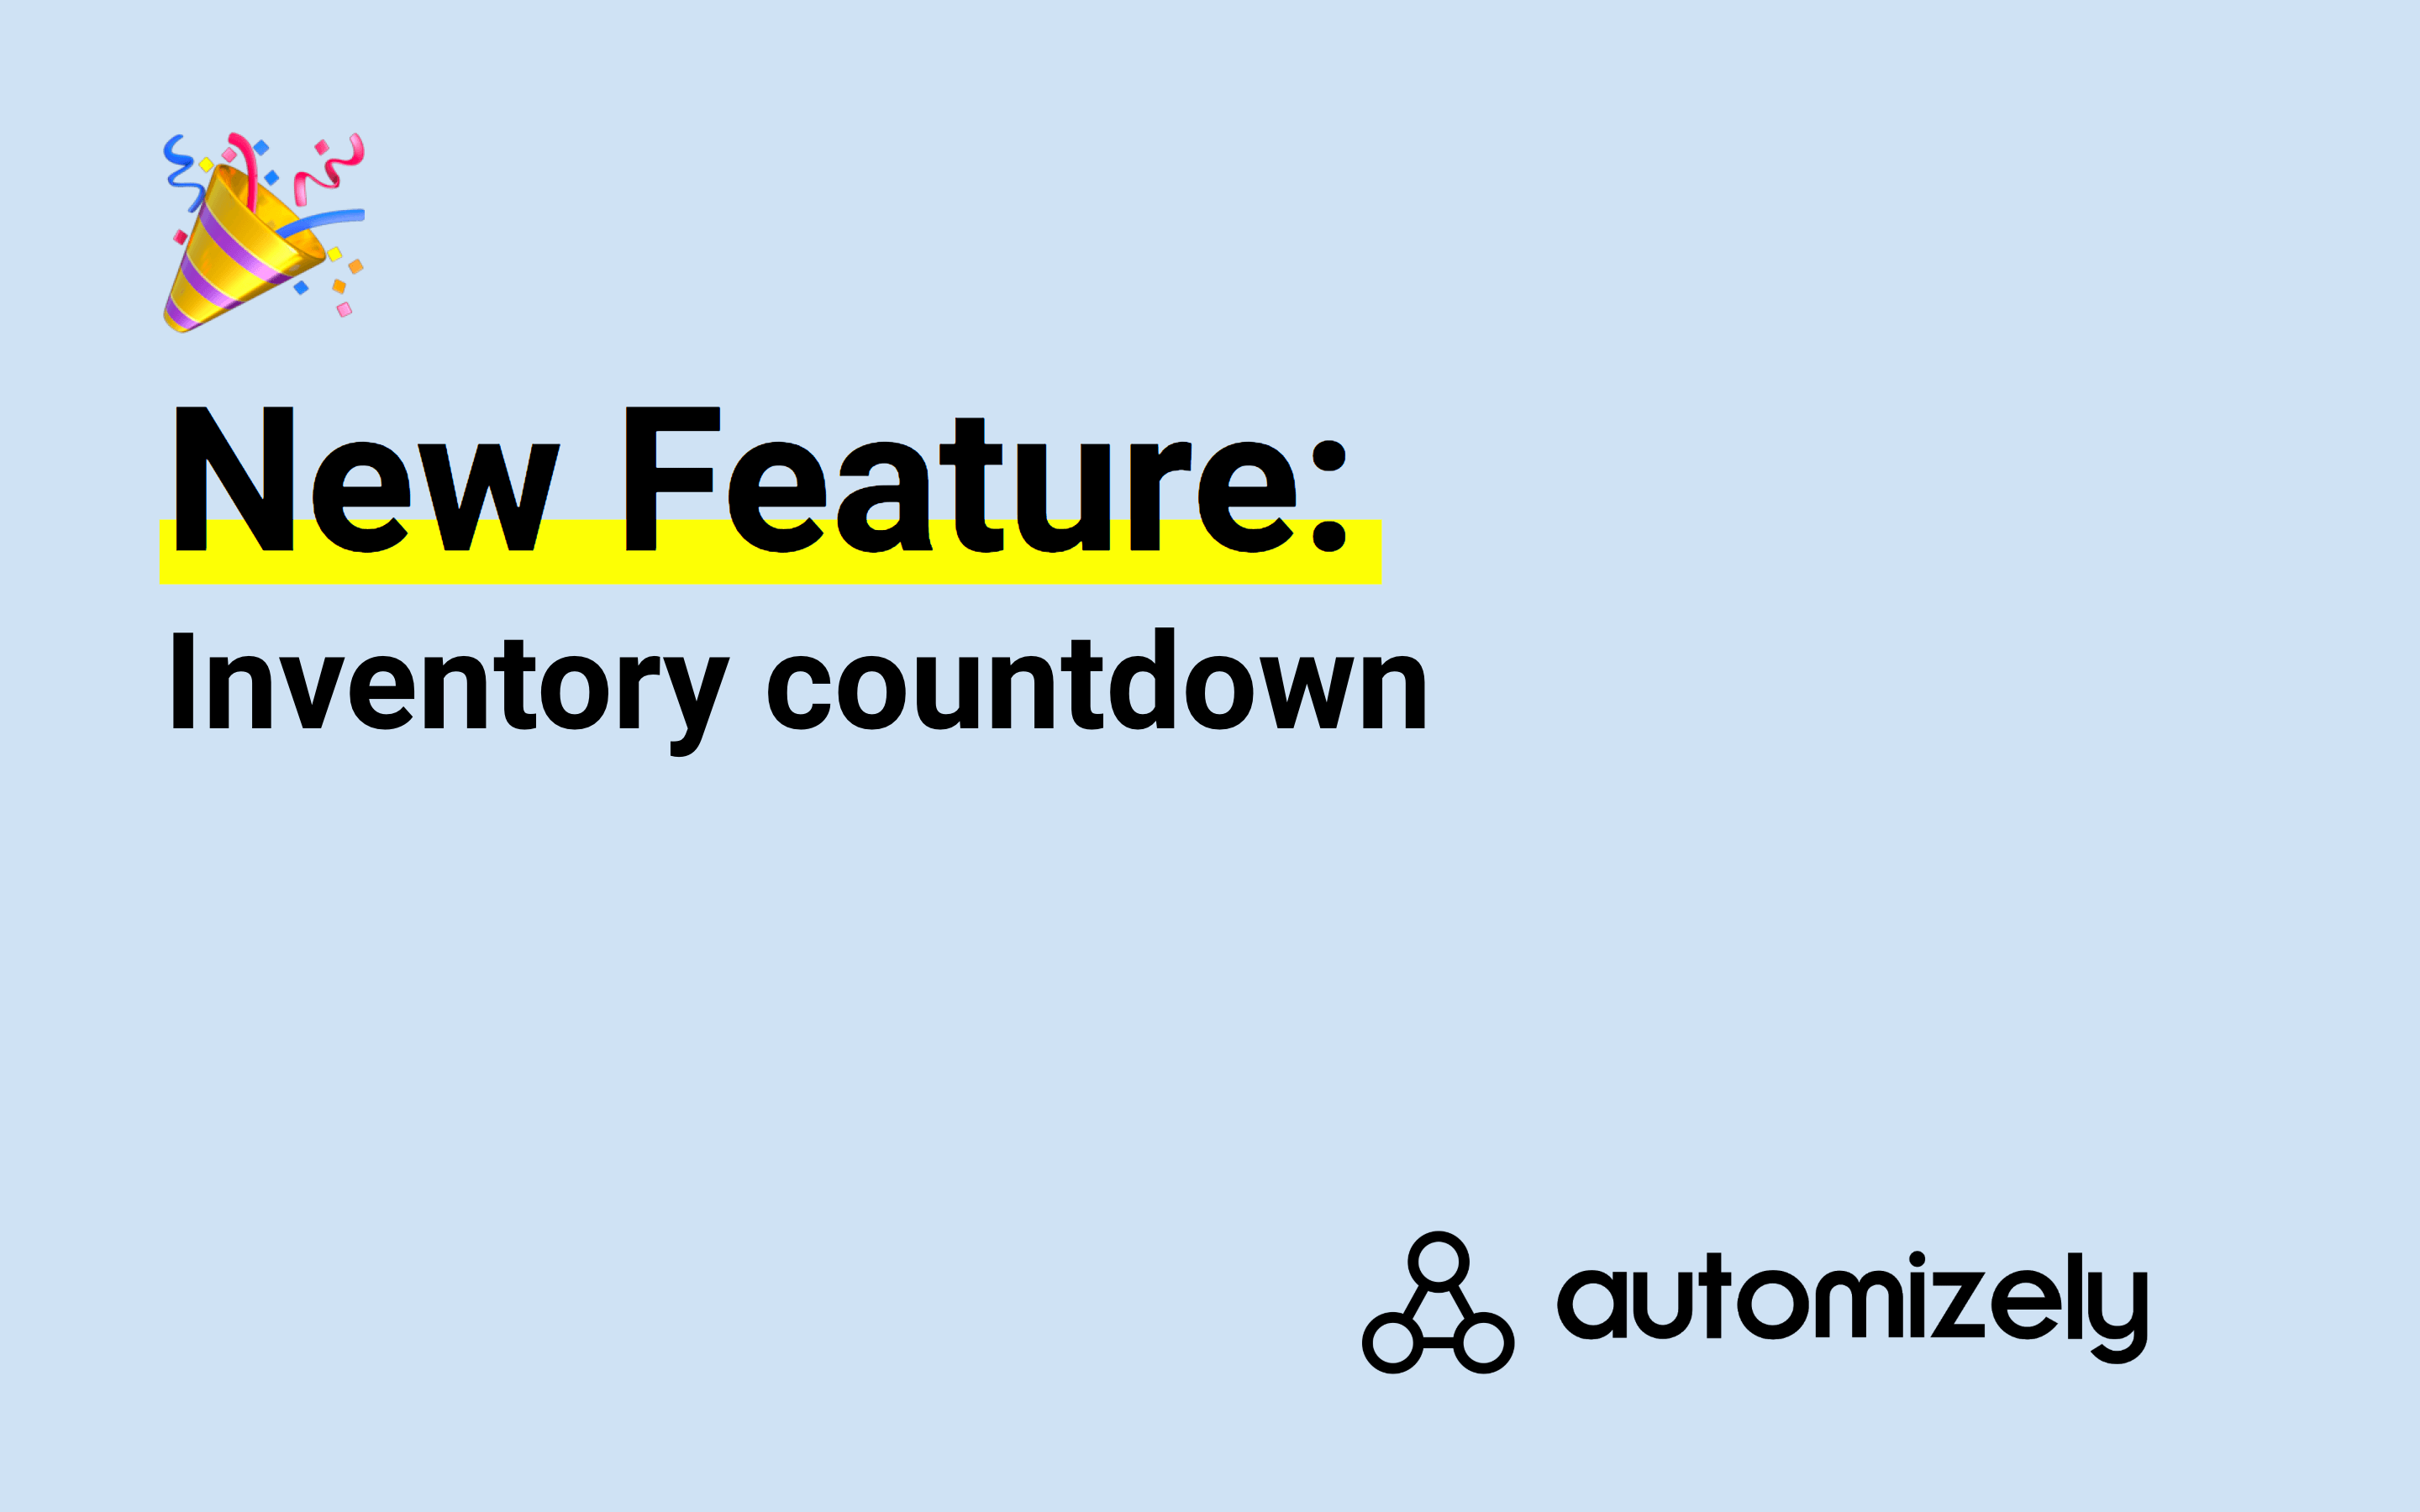 New feature: Inventory countdown